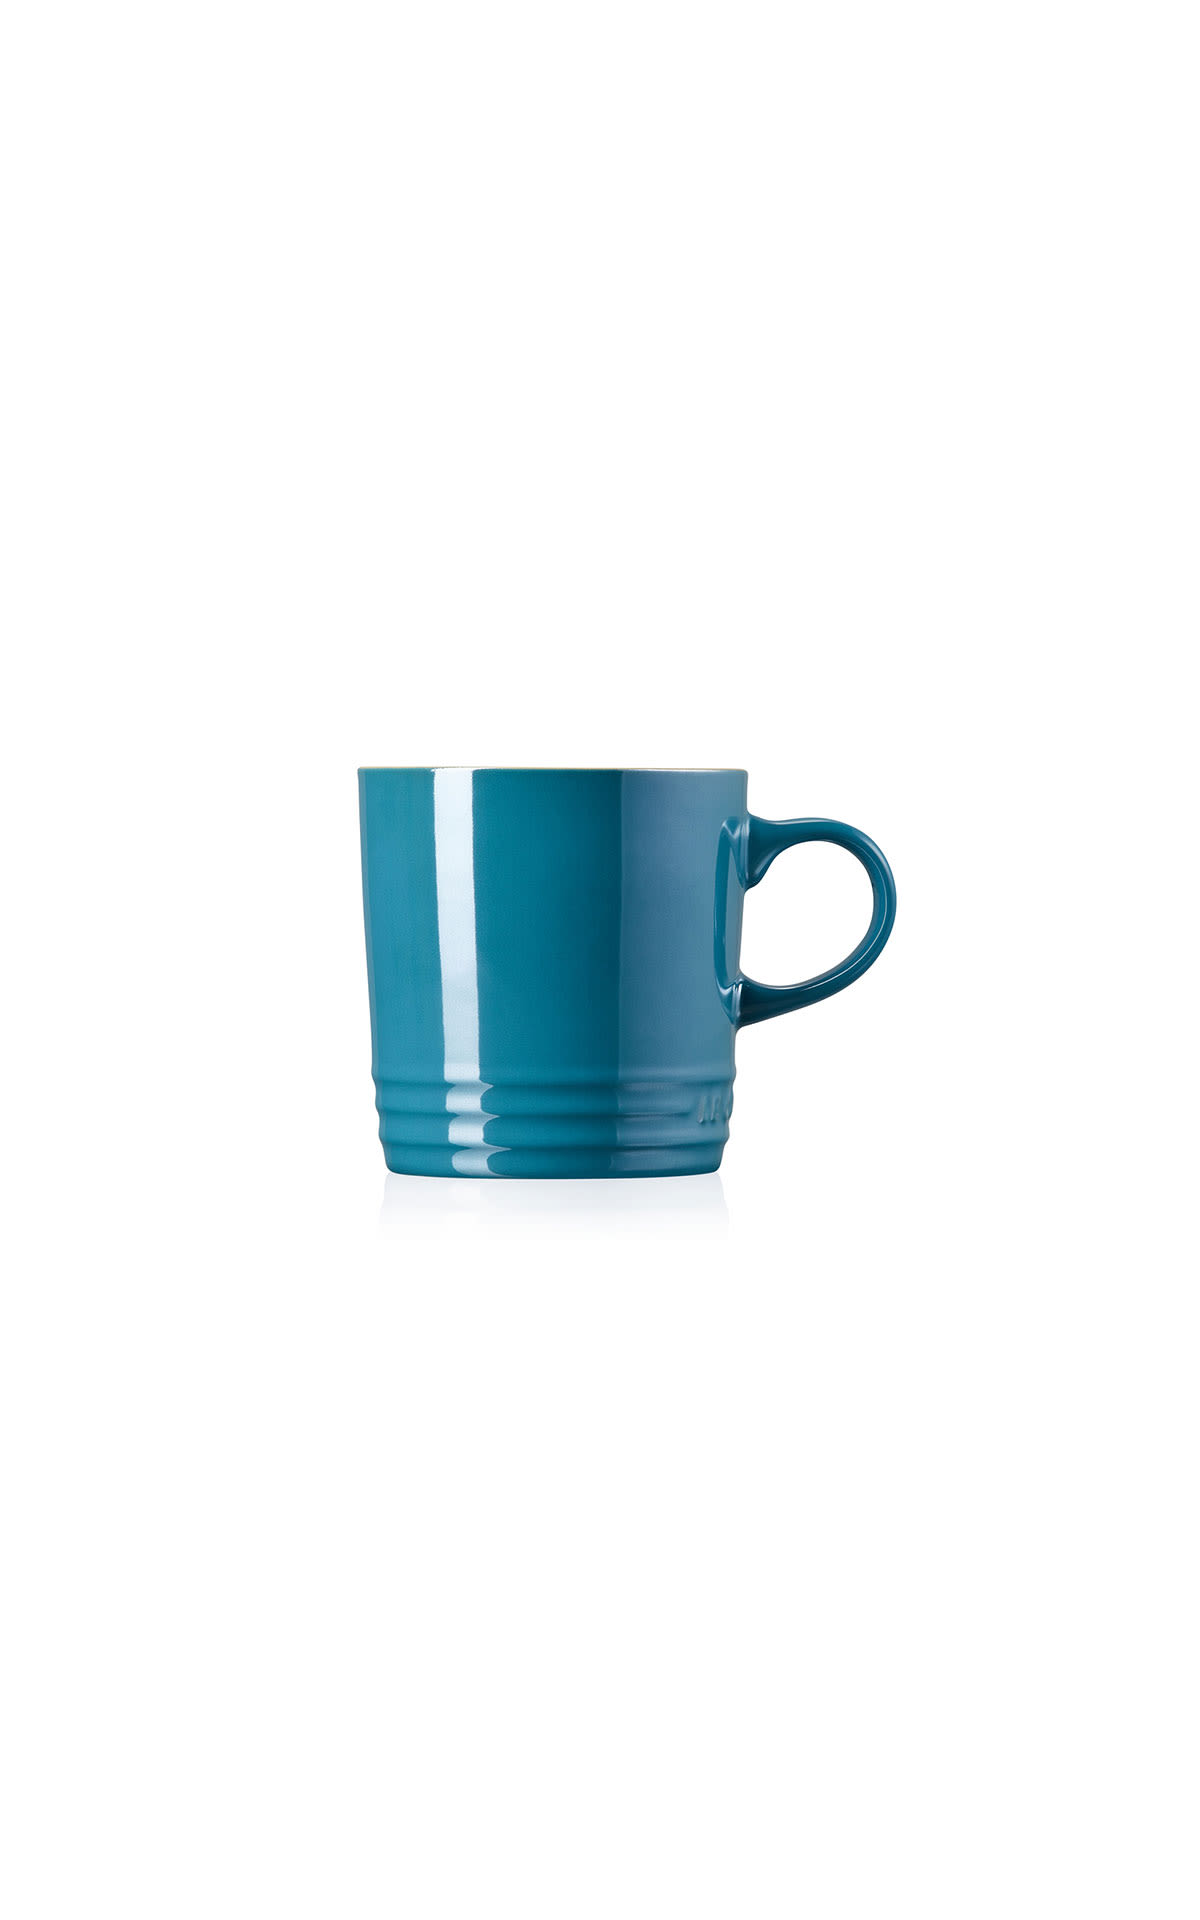 Le Creuset Pearlized mug deep teal from Bicester Village